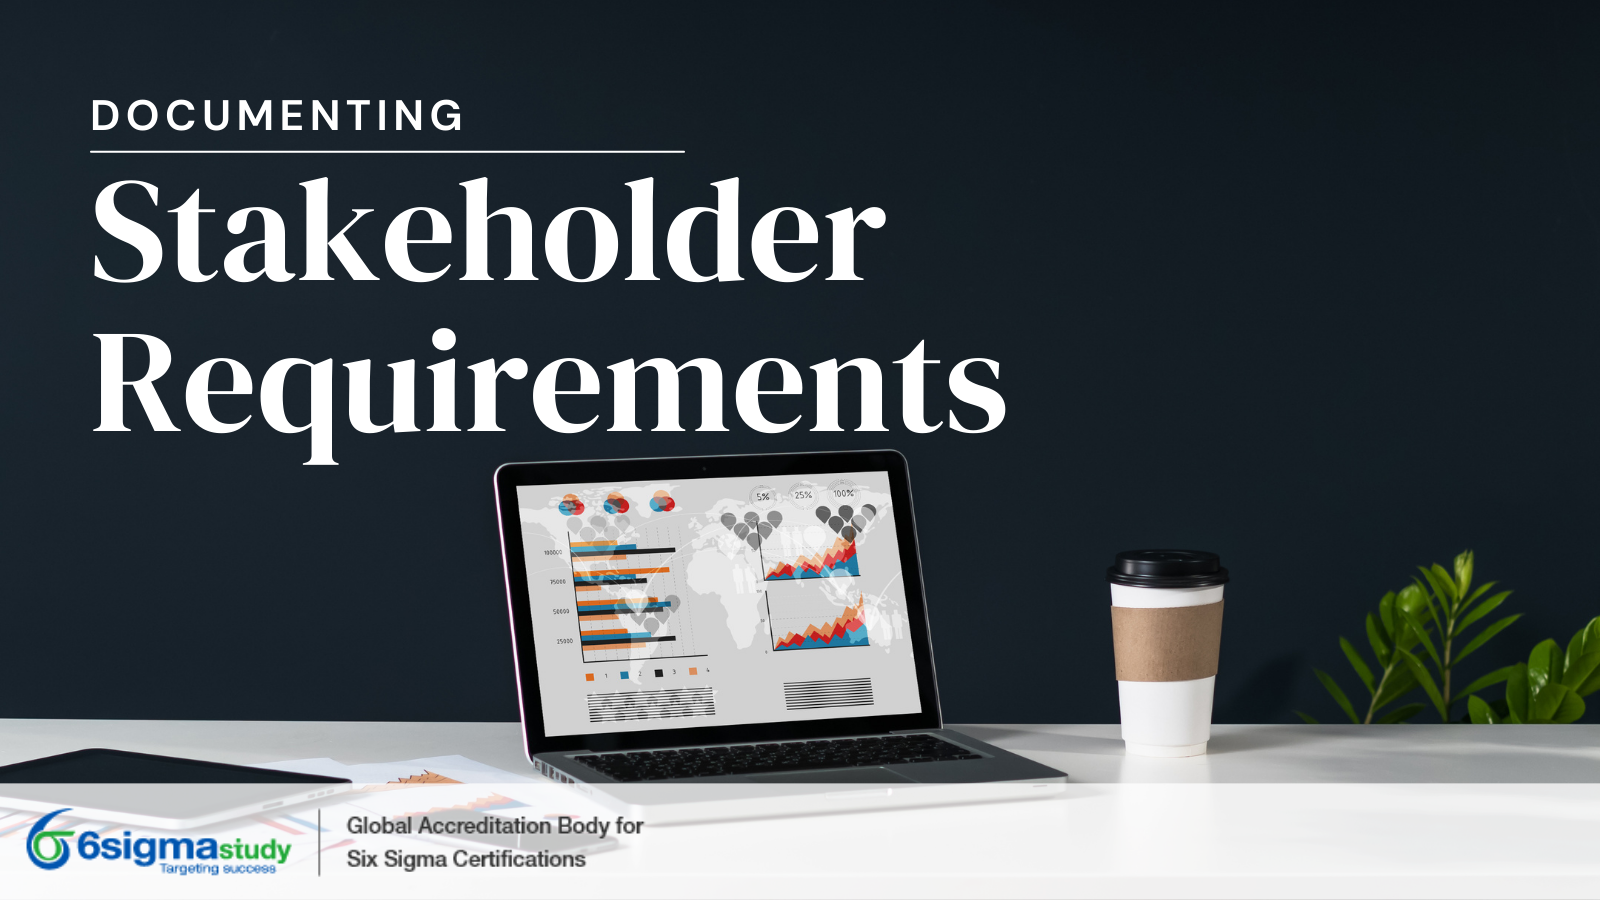 Documenting Stakeholder Requirements